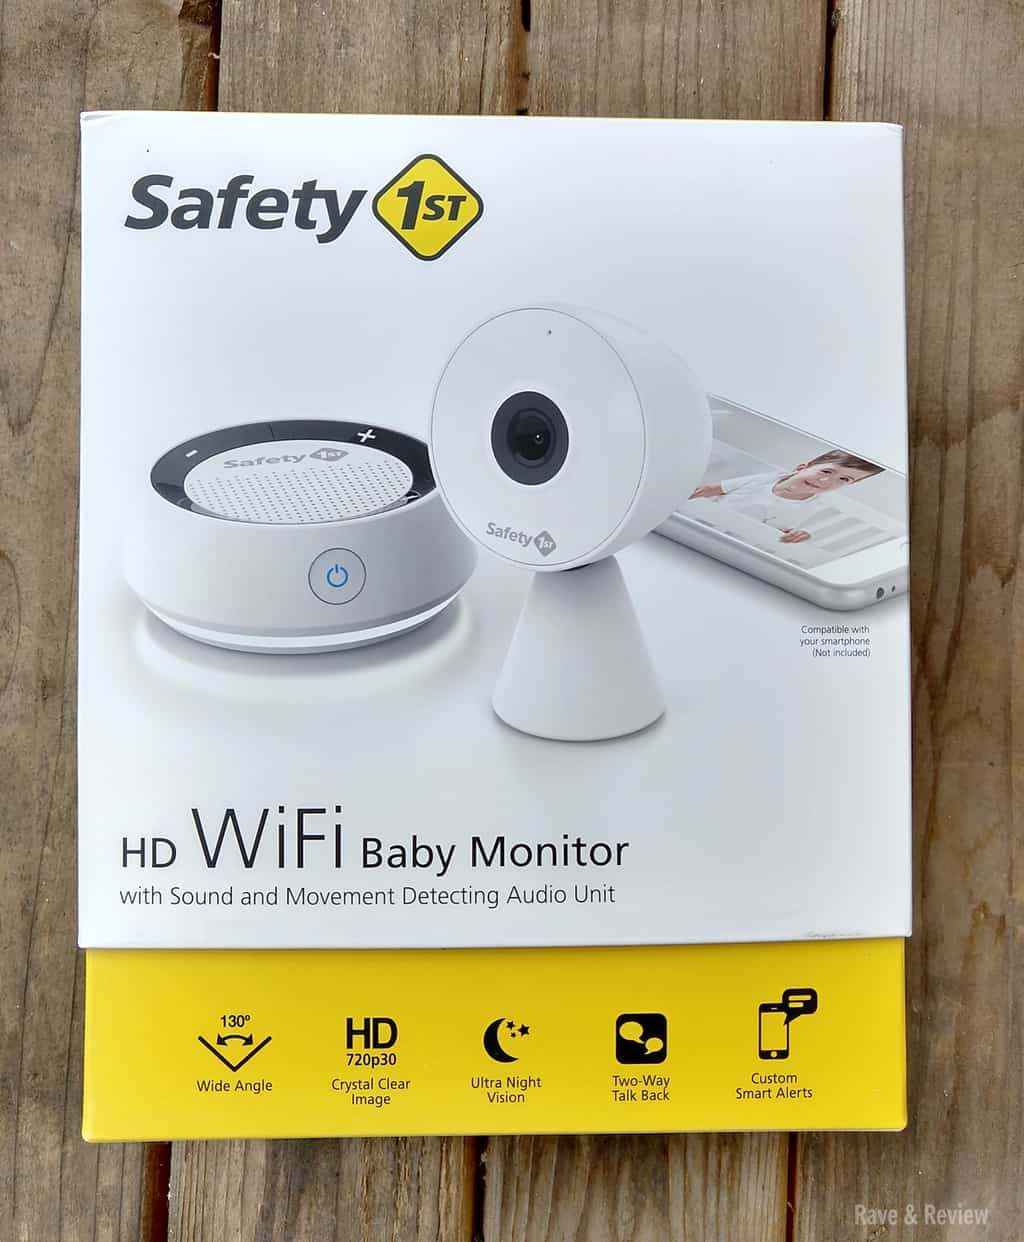 Safety 1st camera with audio unit in box